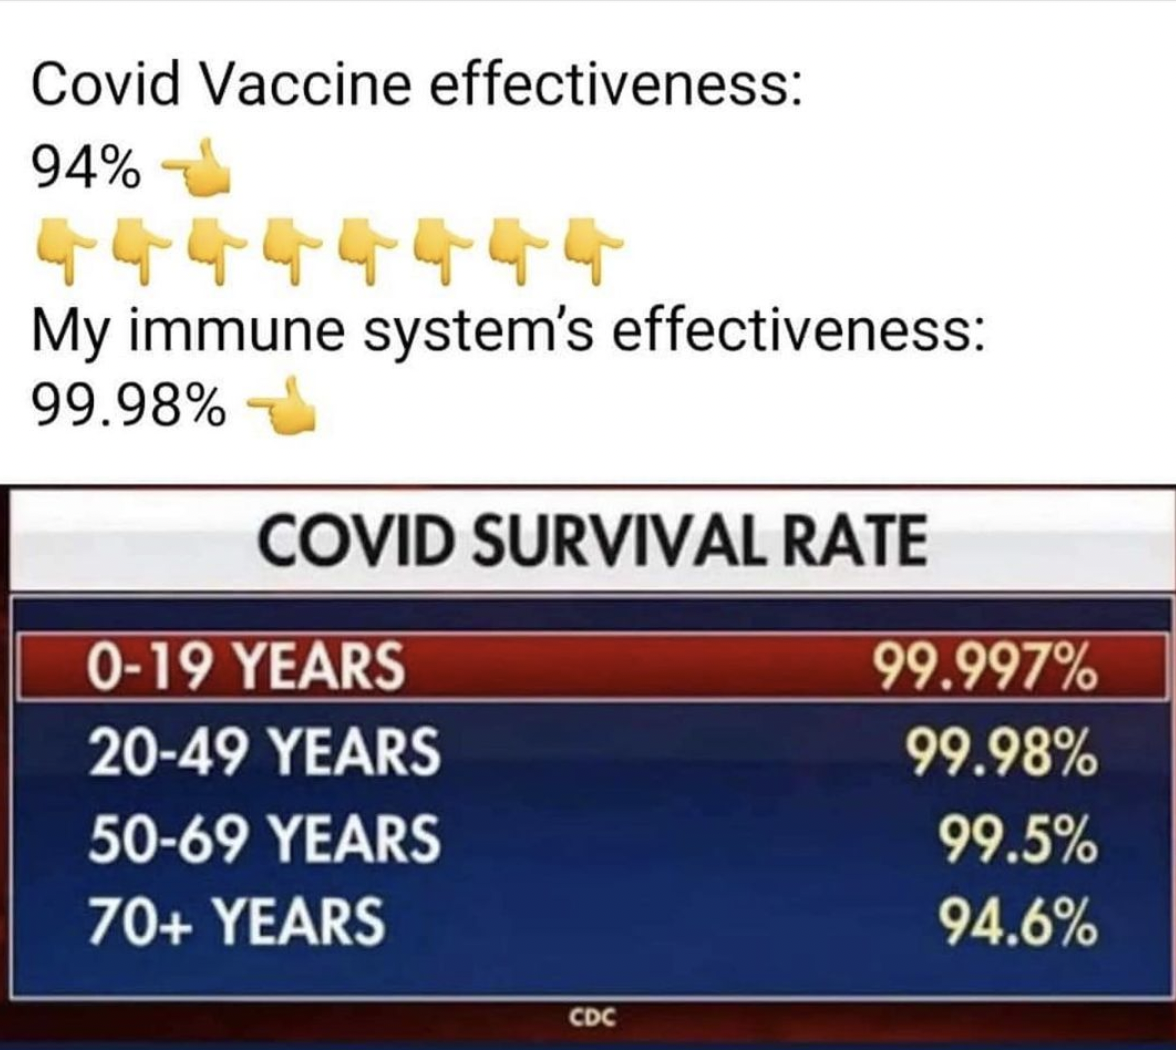 COVID-19 Is Probably 99% Survivable for Most Age Groups, but PolitiFact Rated This False